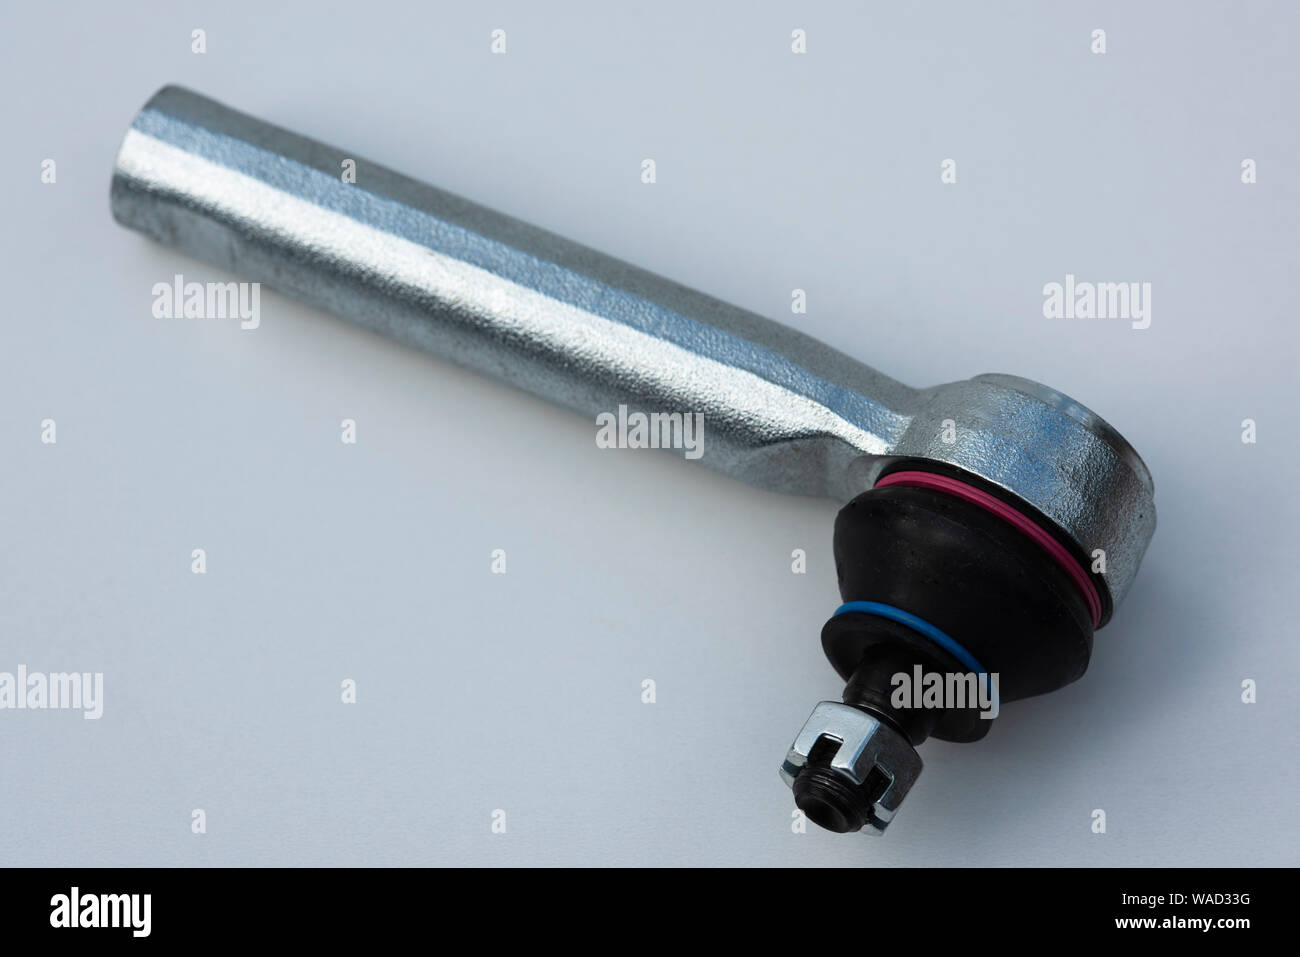 A new tie rod end showiing rubber gaiter and castellated nut prior to installation on a modern passenger vehicle Stock Photo